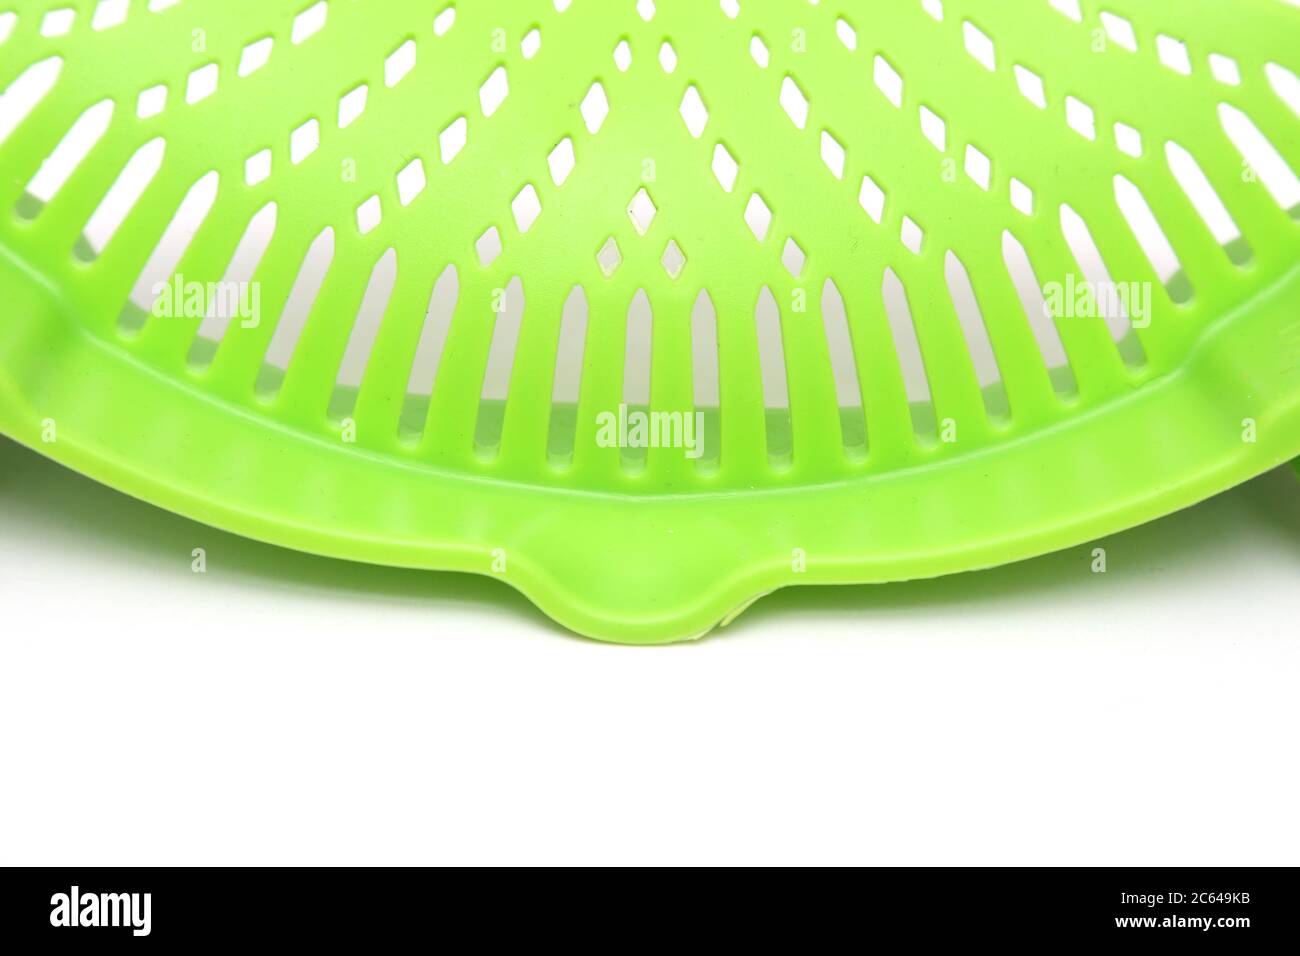 Portrait of Gizmo Snap's Strain Strainer. Isolated on white background. Stock Photo